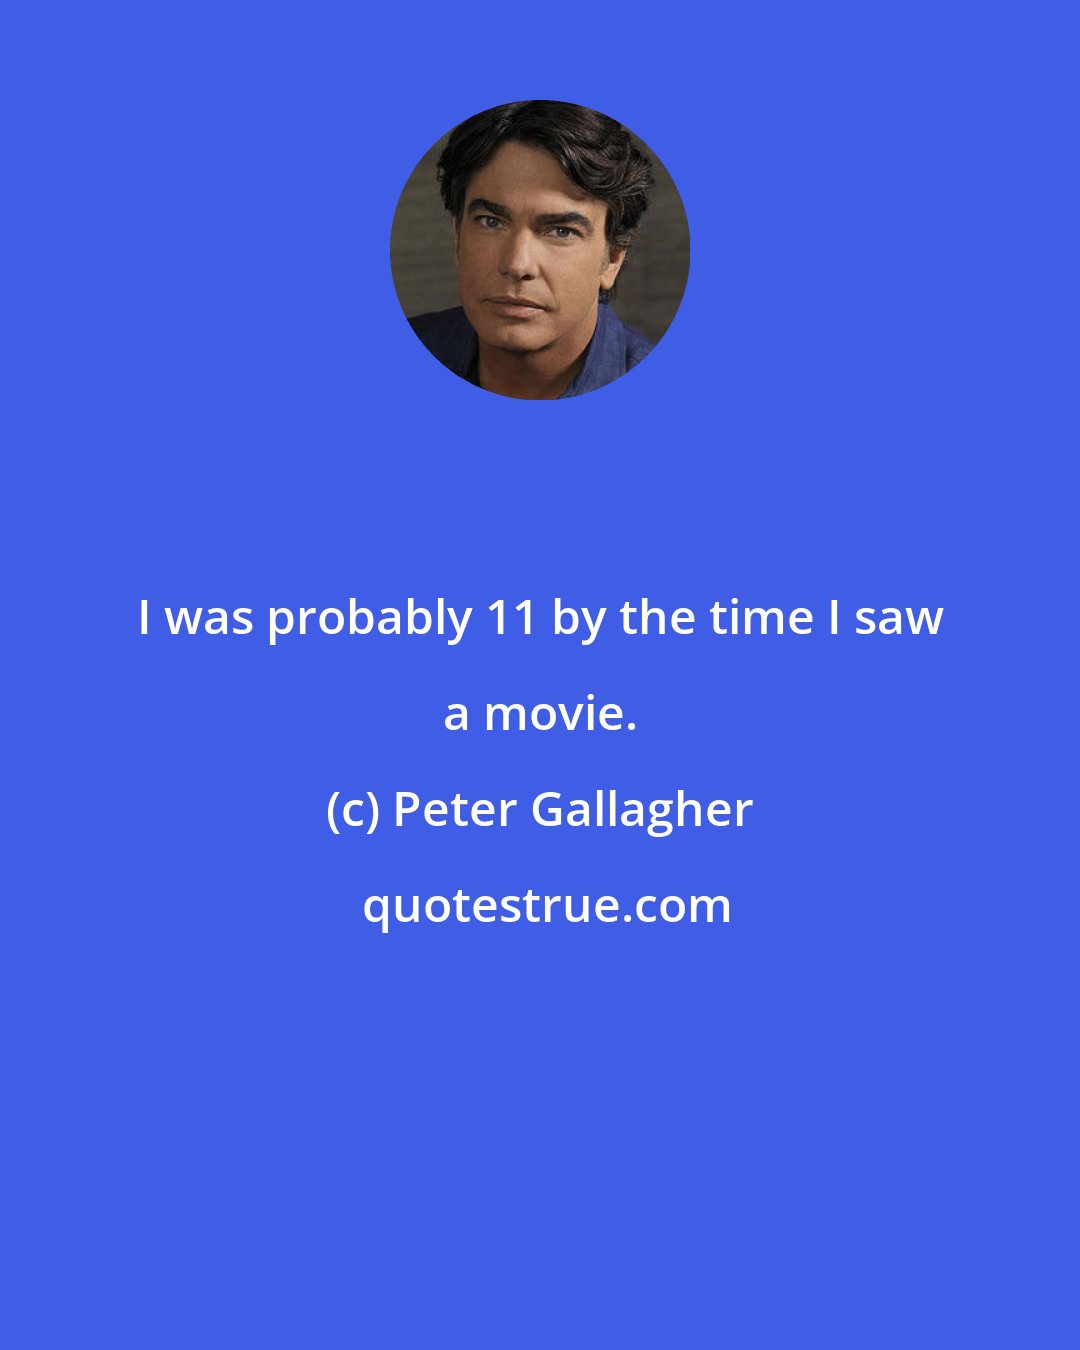 Peter Gallagher: I was probably 11 by the time I saw a movie.